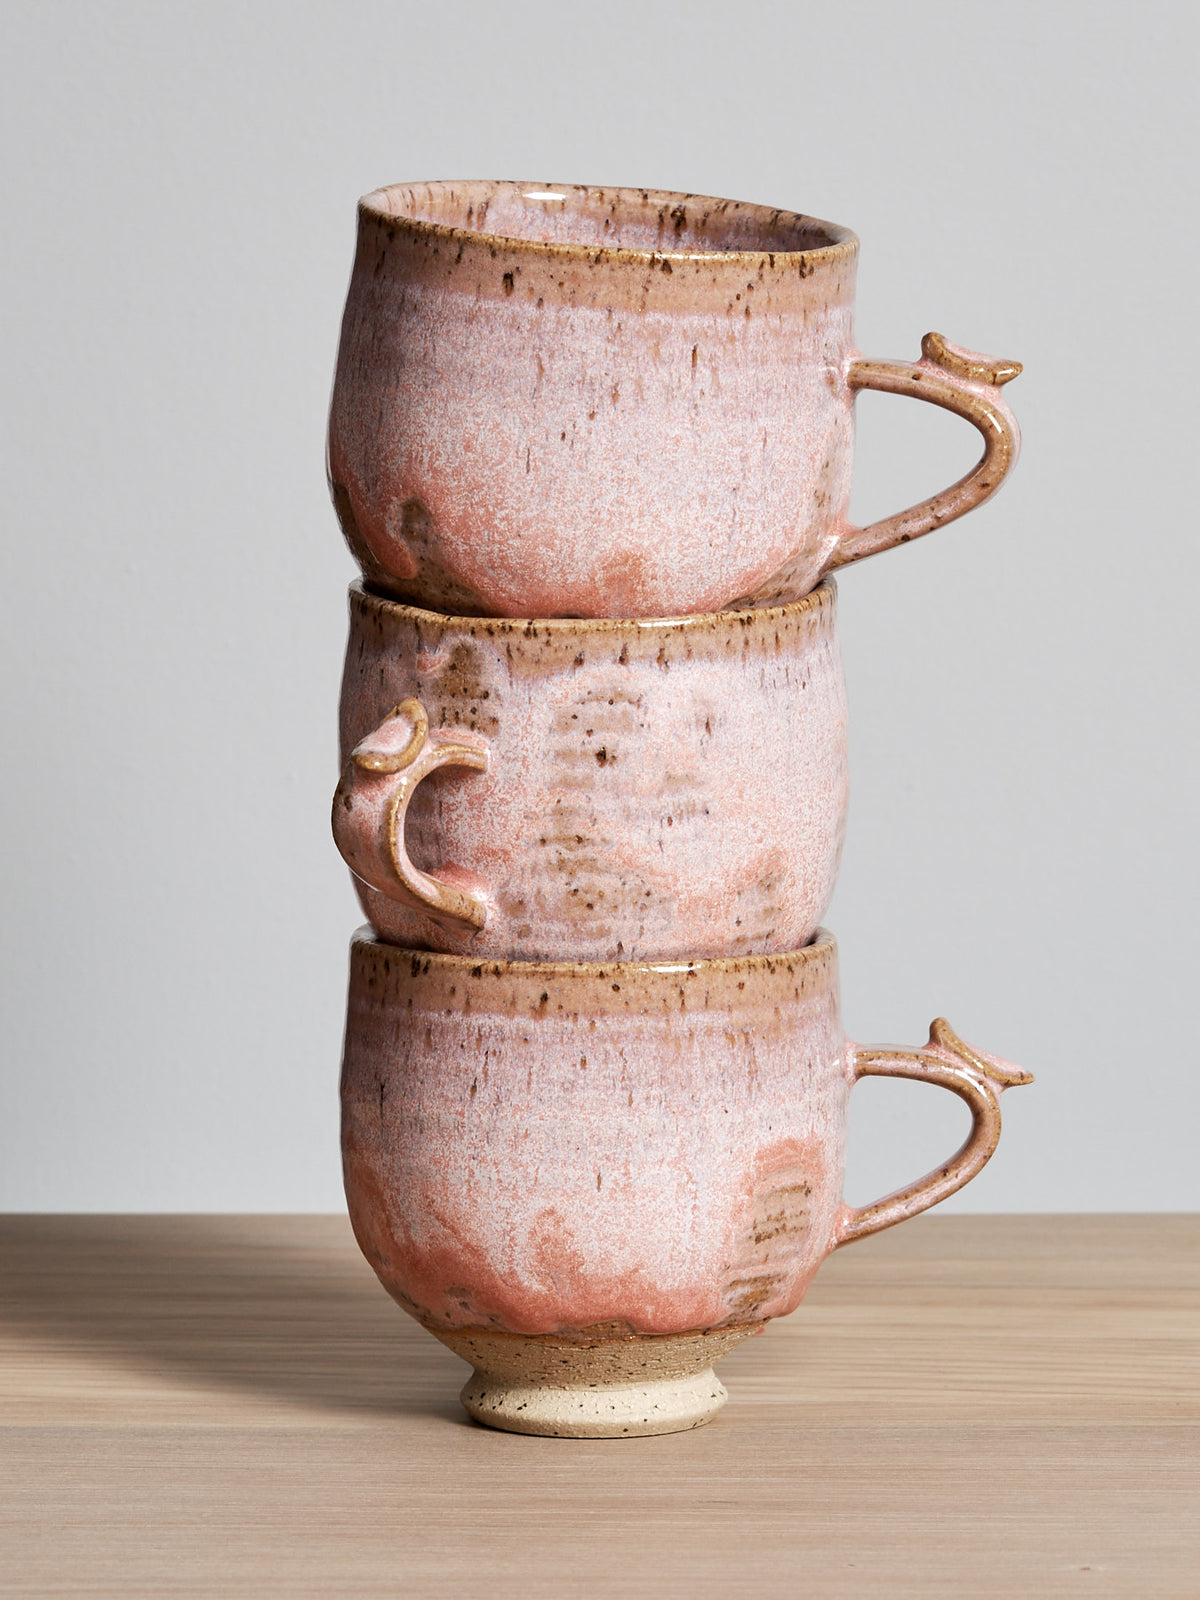 Three Bird Handle Cups - Rhubarb by Jino Ceramic Studio stacked on top of each other.